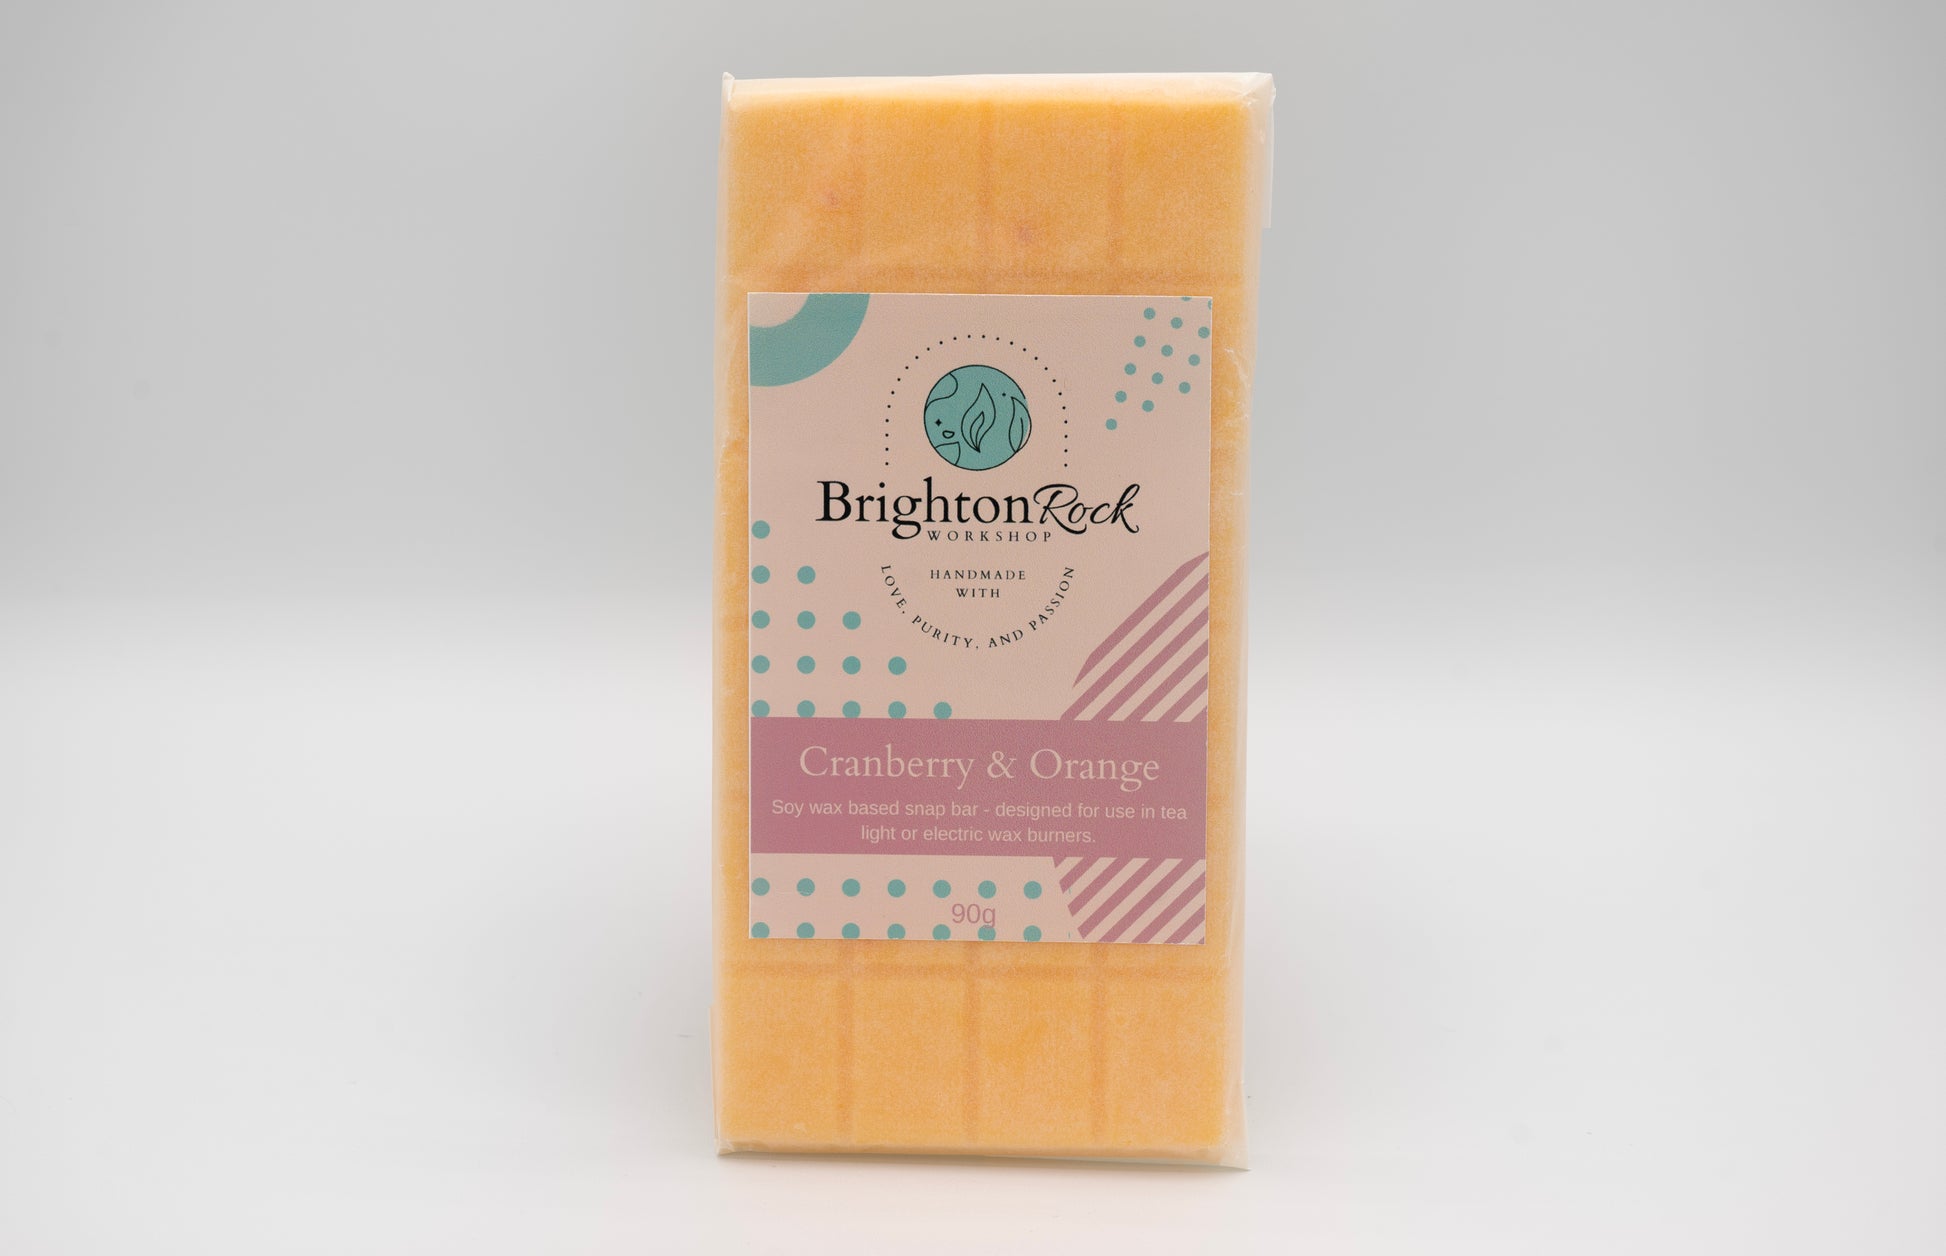 cranberry & orange 30g or 90g strongly scented wax melt snap bars. Eco friendly waxed paper packaging. Brighton Rock Workshop wax melts made in Spain and the United Kingdom, available in two sizes. Suitable for tea light or electric burners